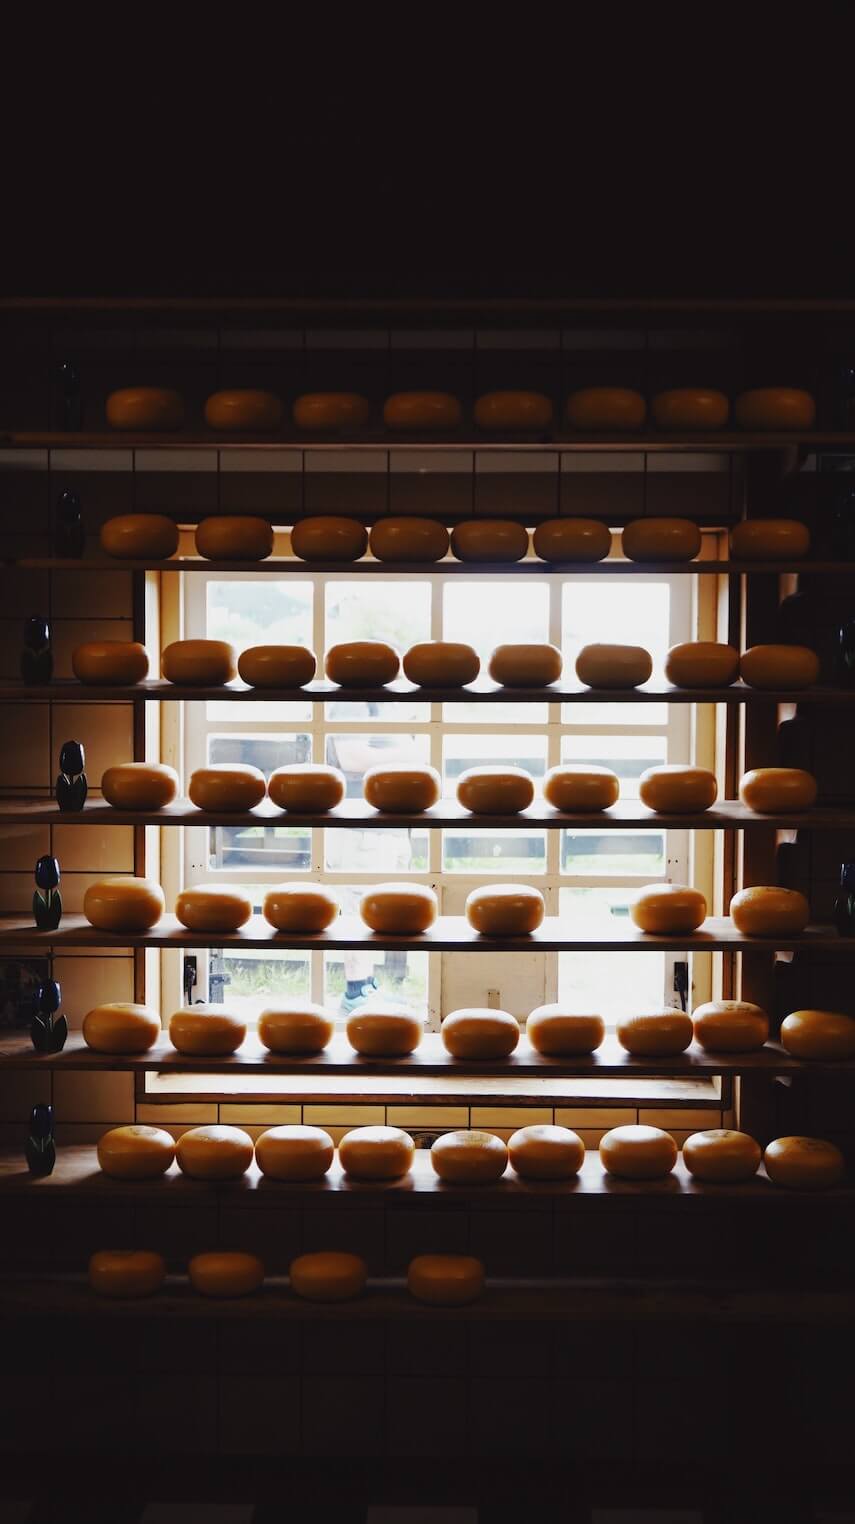 Round yellow wax covered wheels of cheese stacked in front of a window